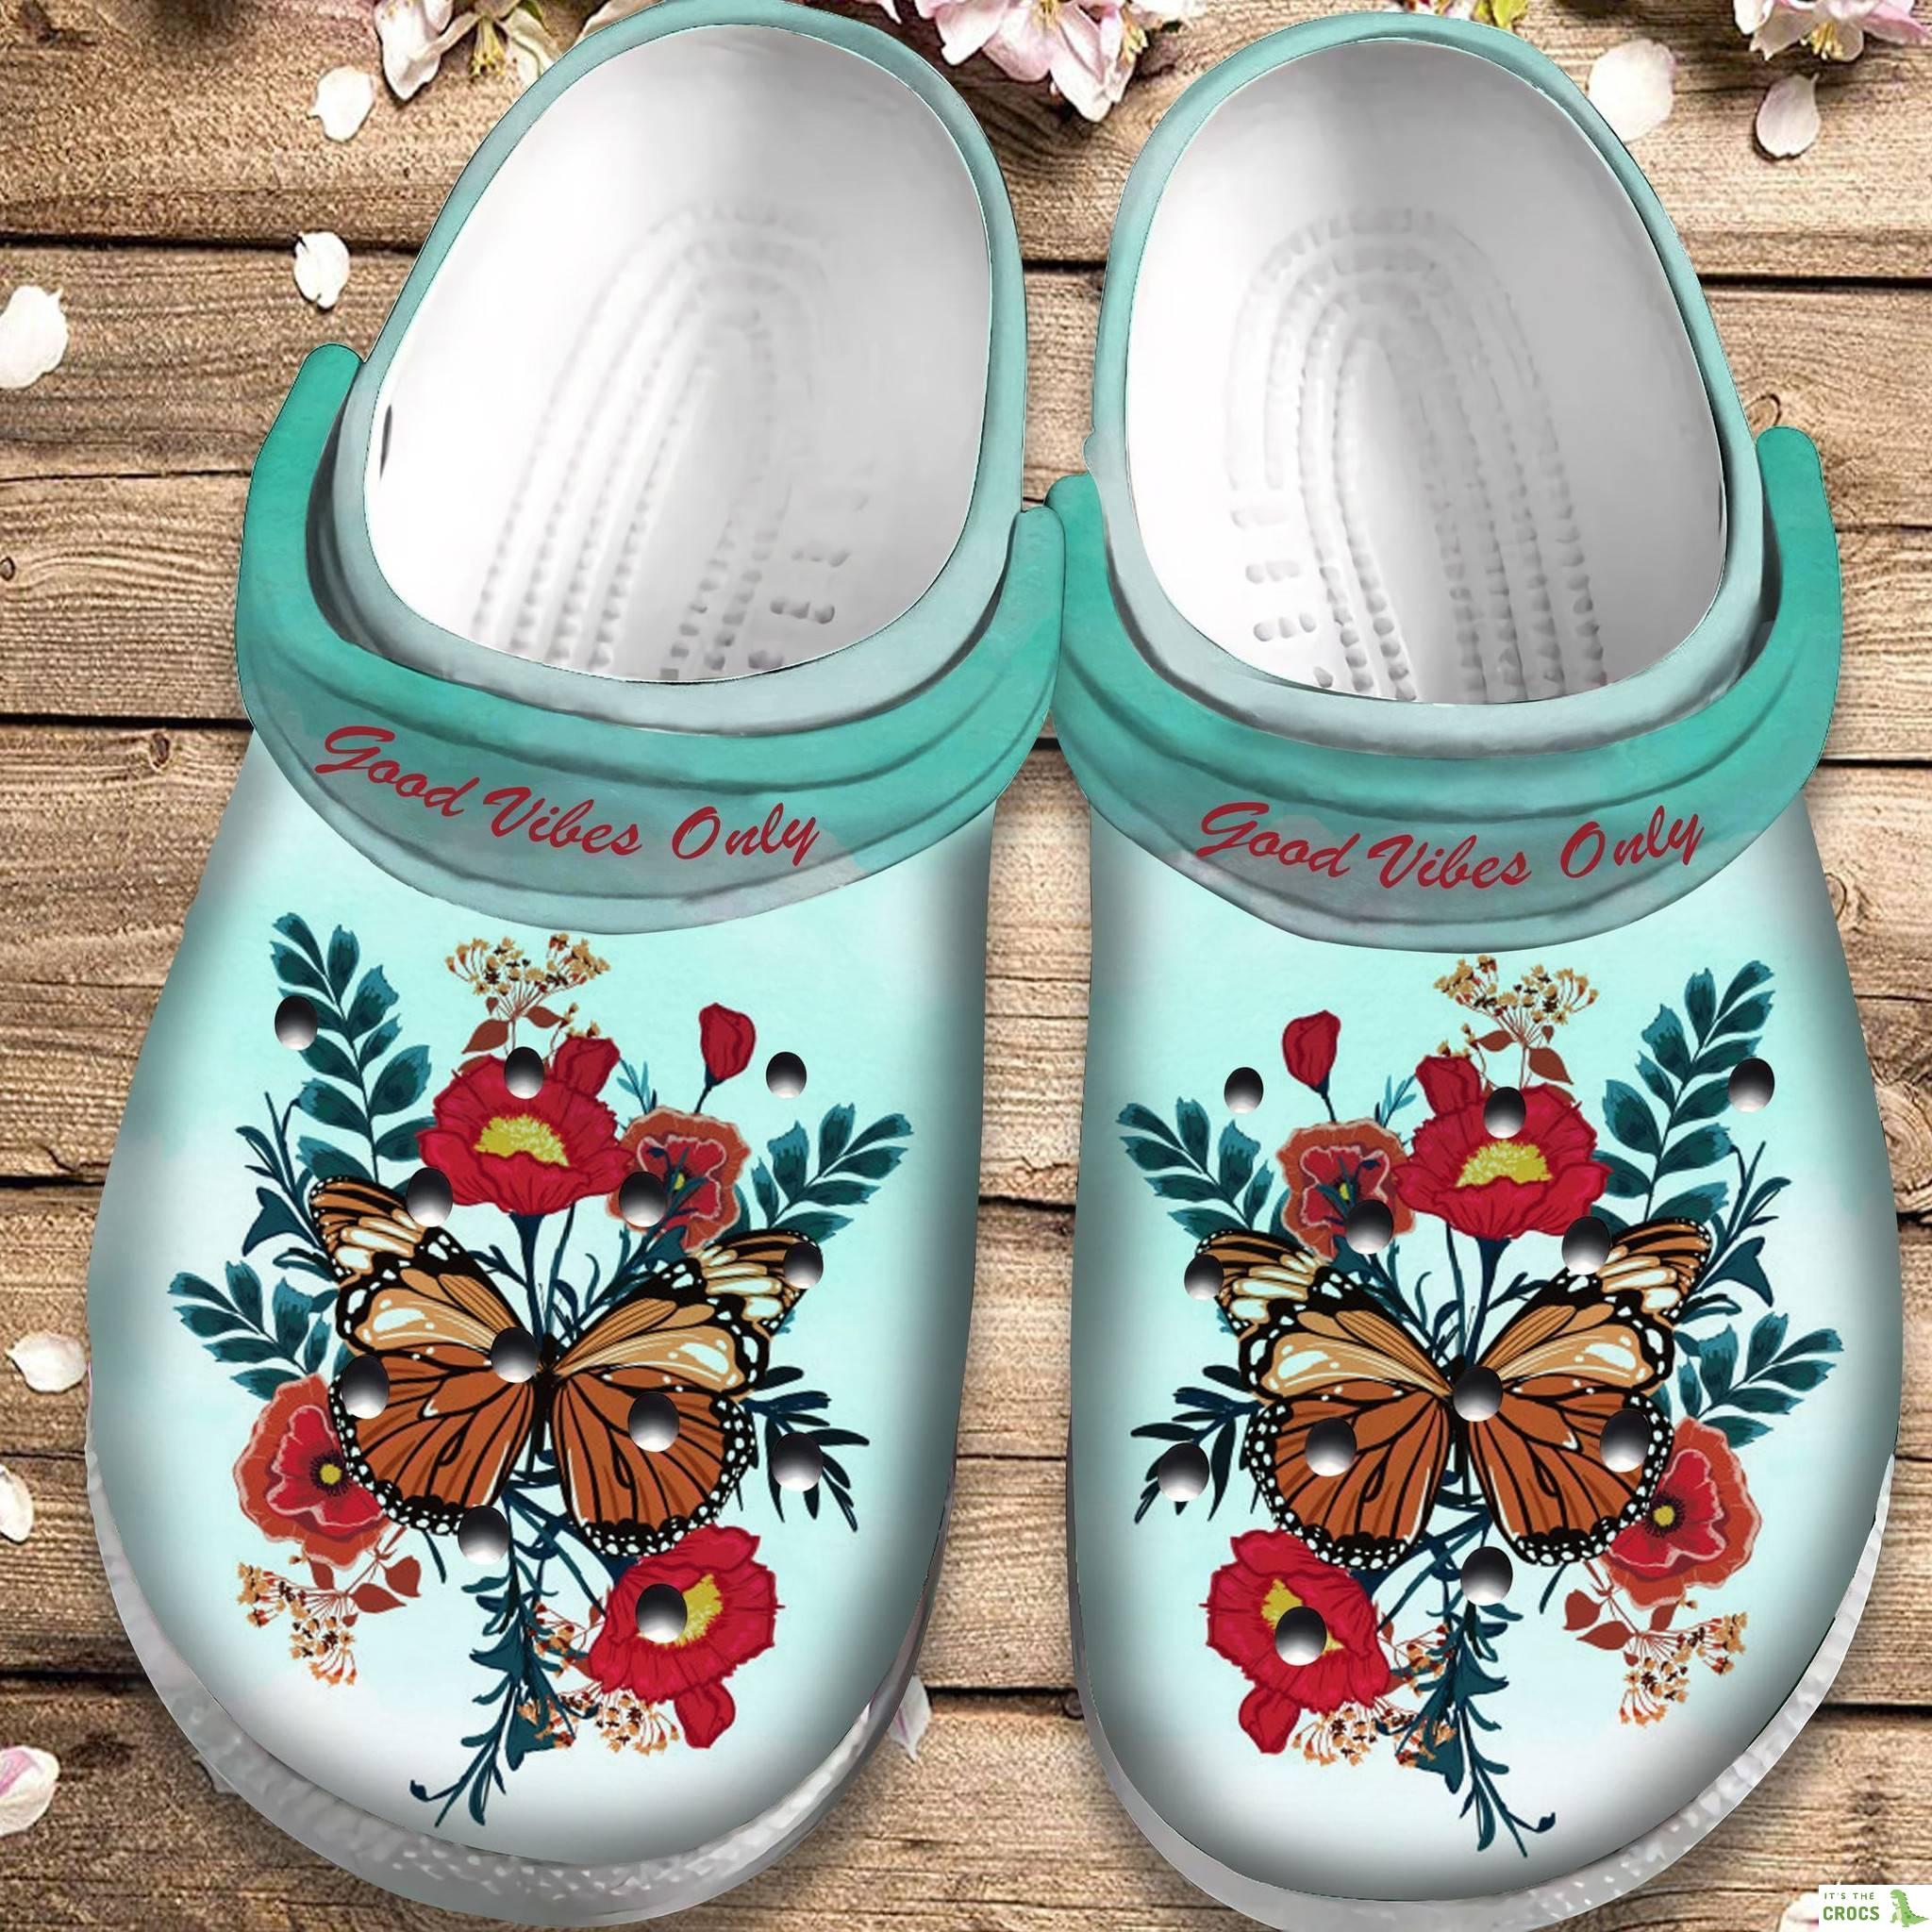 Good Vibes Only Crocs Clog Shoes – Red Flower And Butterfly Outdoor Crocs Clog Shoes Birthday Gift For Women Girl Mother Daughter Sister Friend